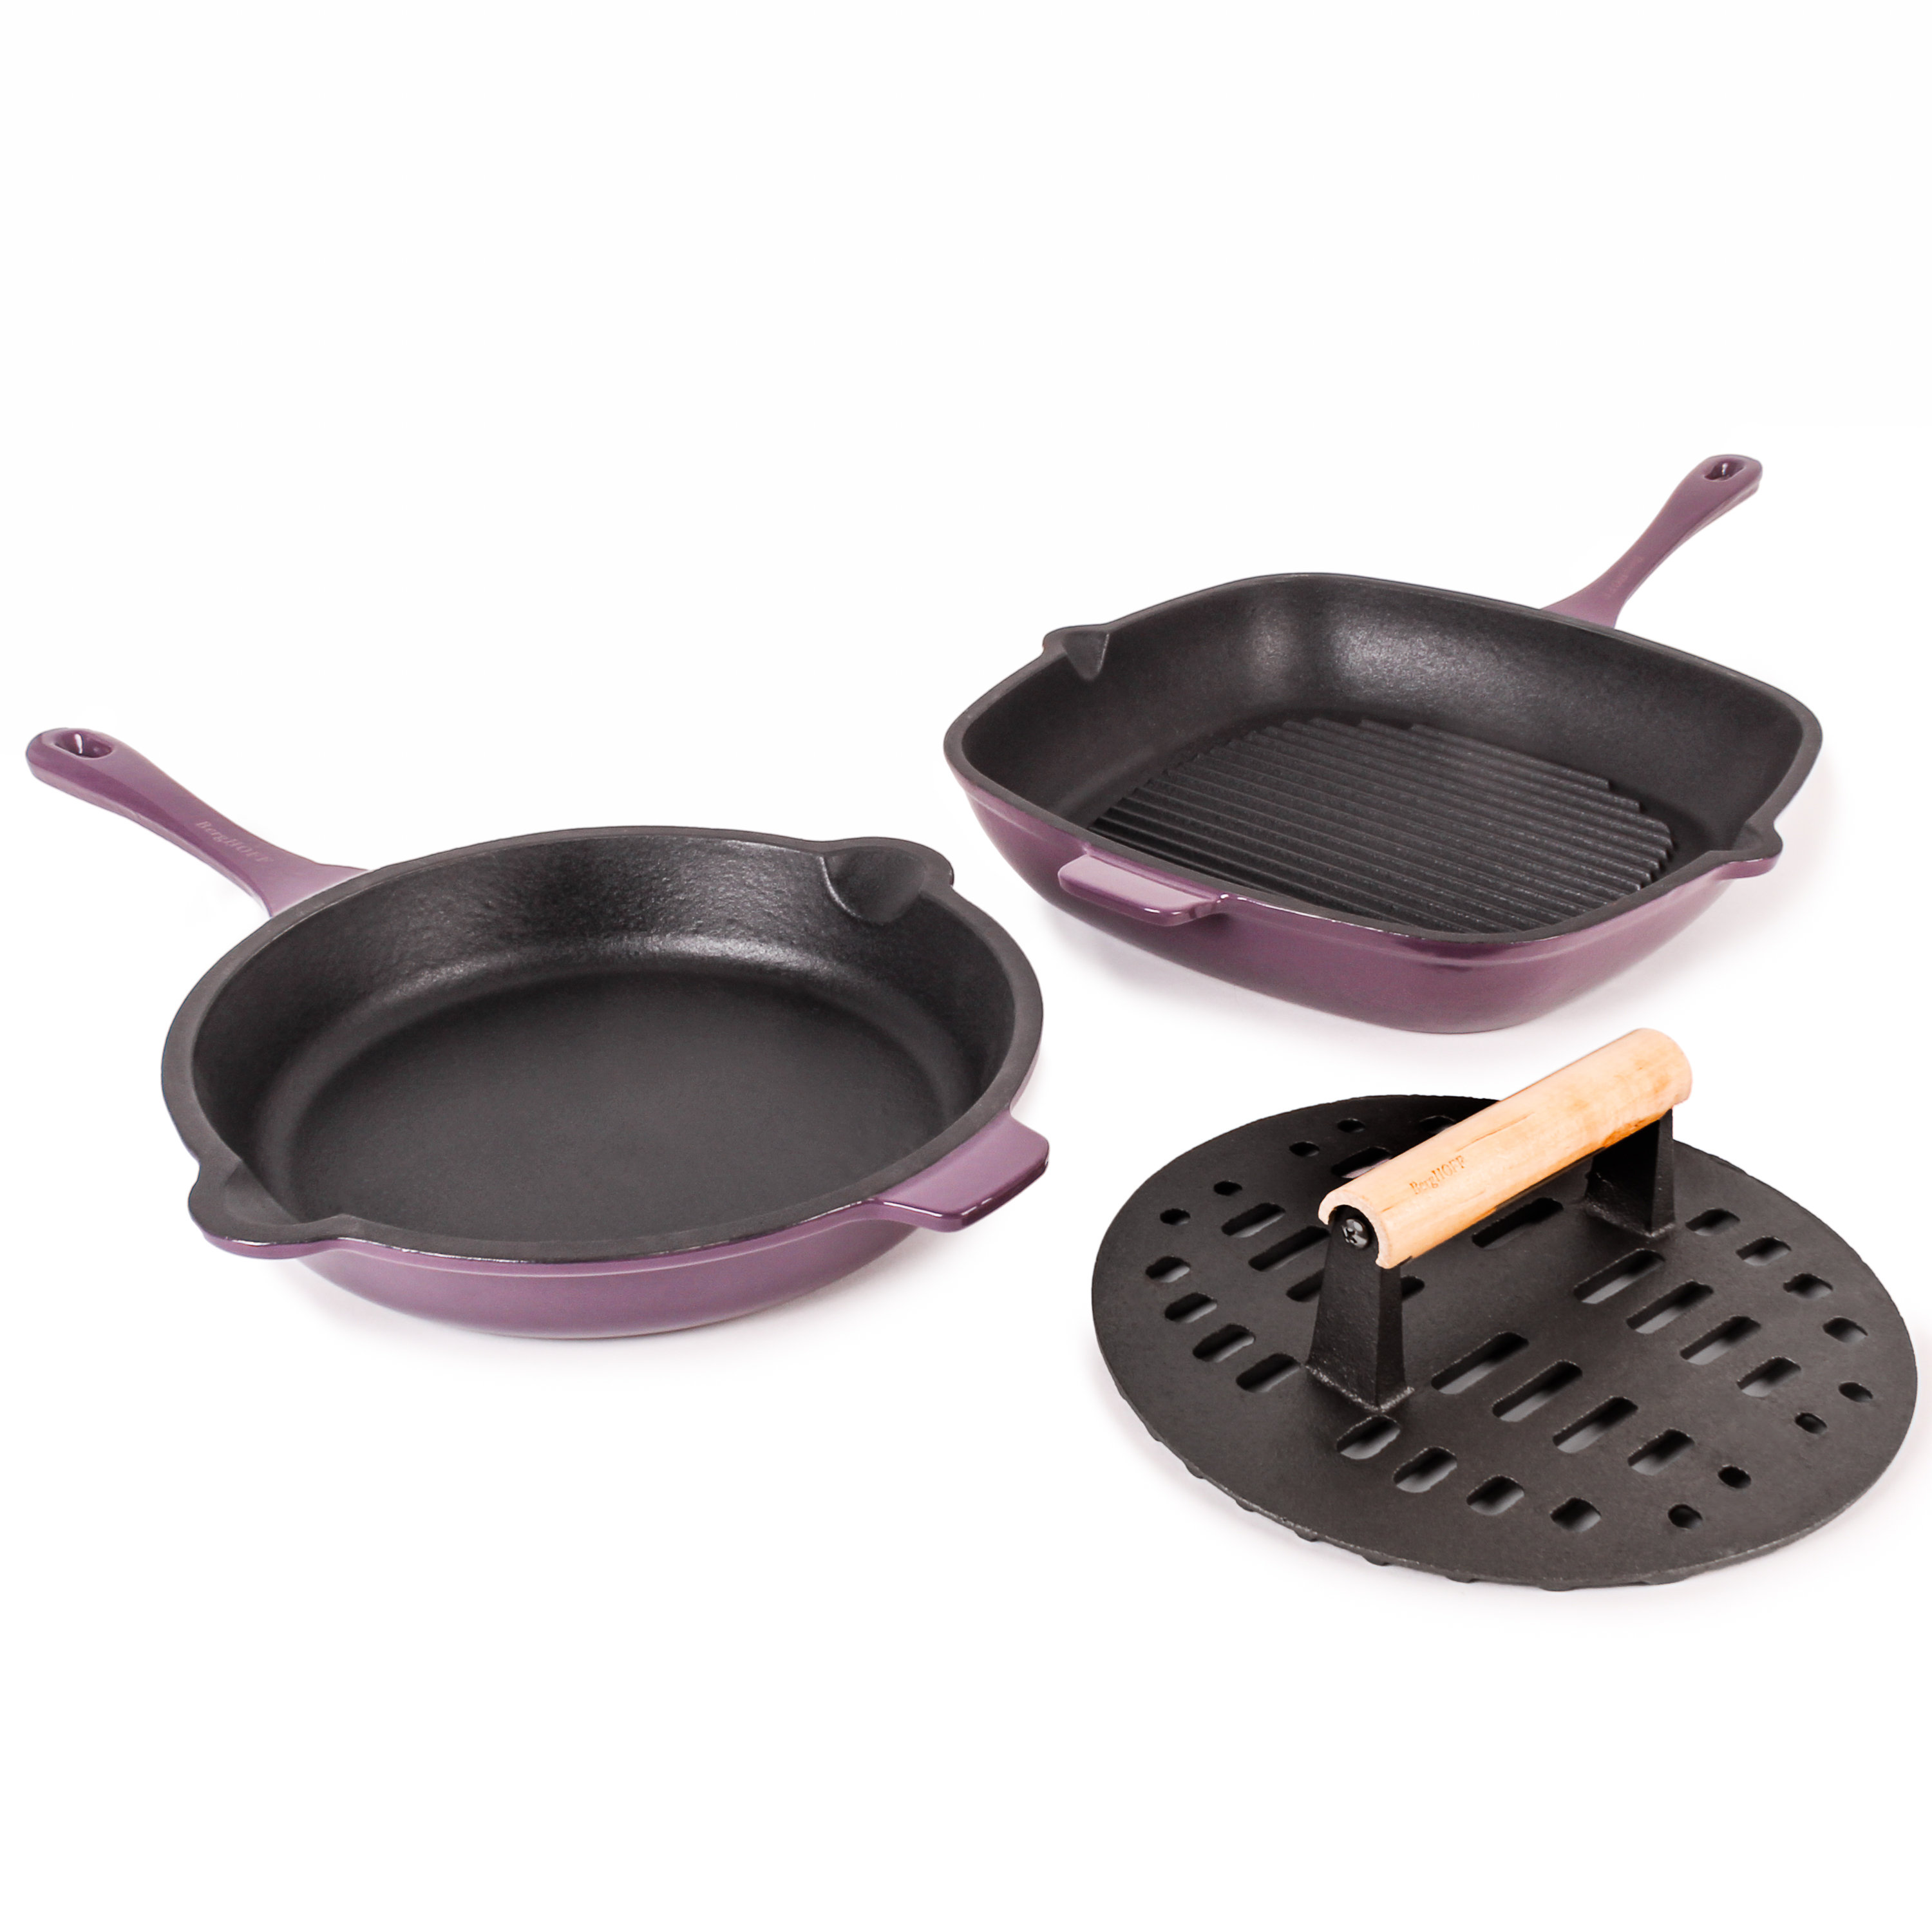 The latest styles: Purchase 3Pcs Pre-Seasoned Cast Iron Skillet Set 6/8/10in  Non-Stick by Blak Hom Blak Hom Now